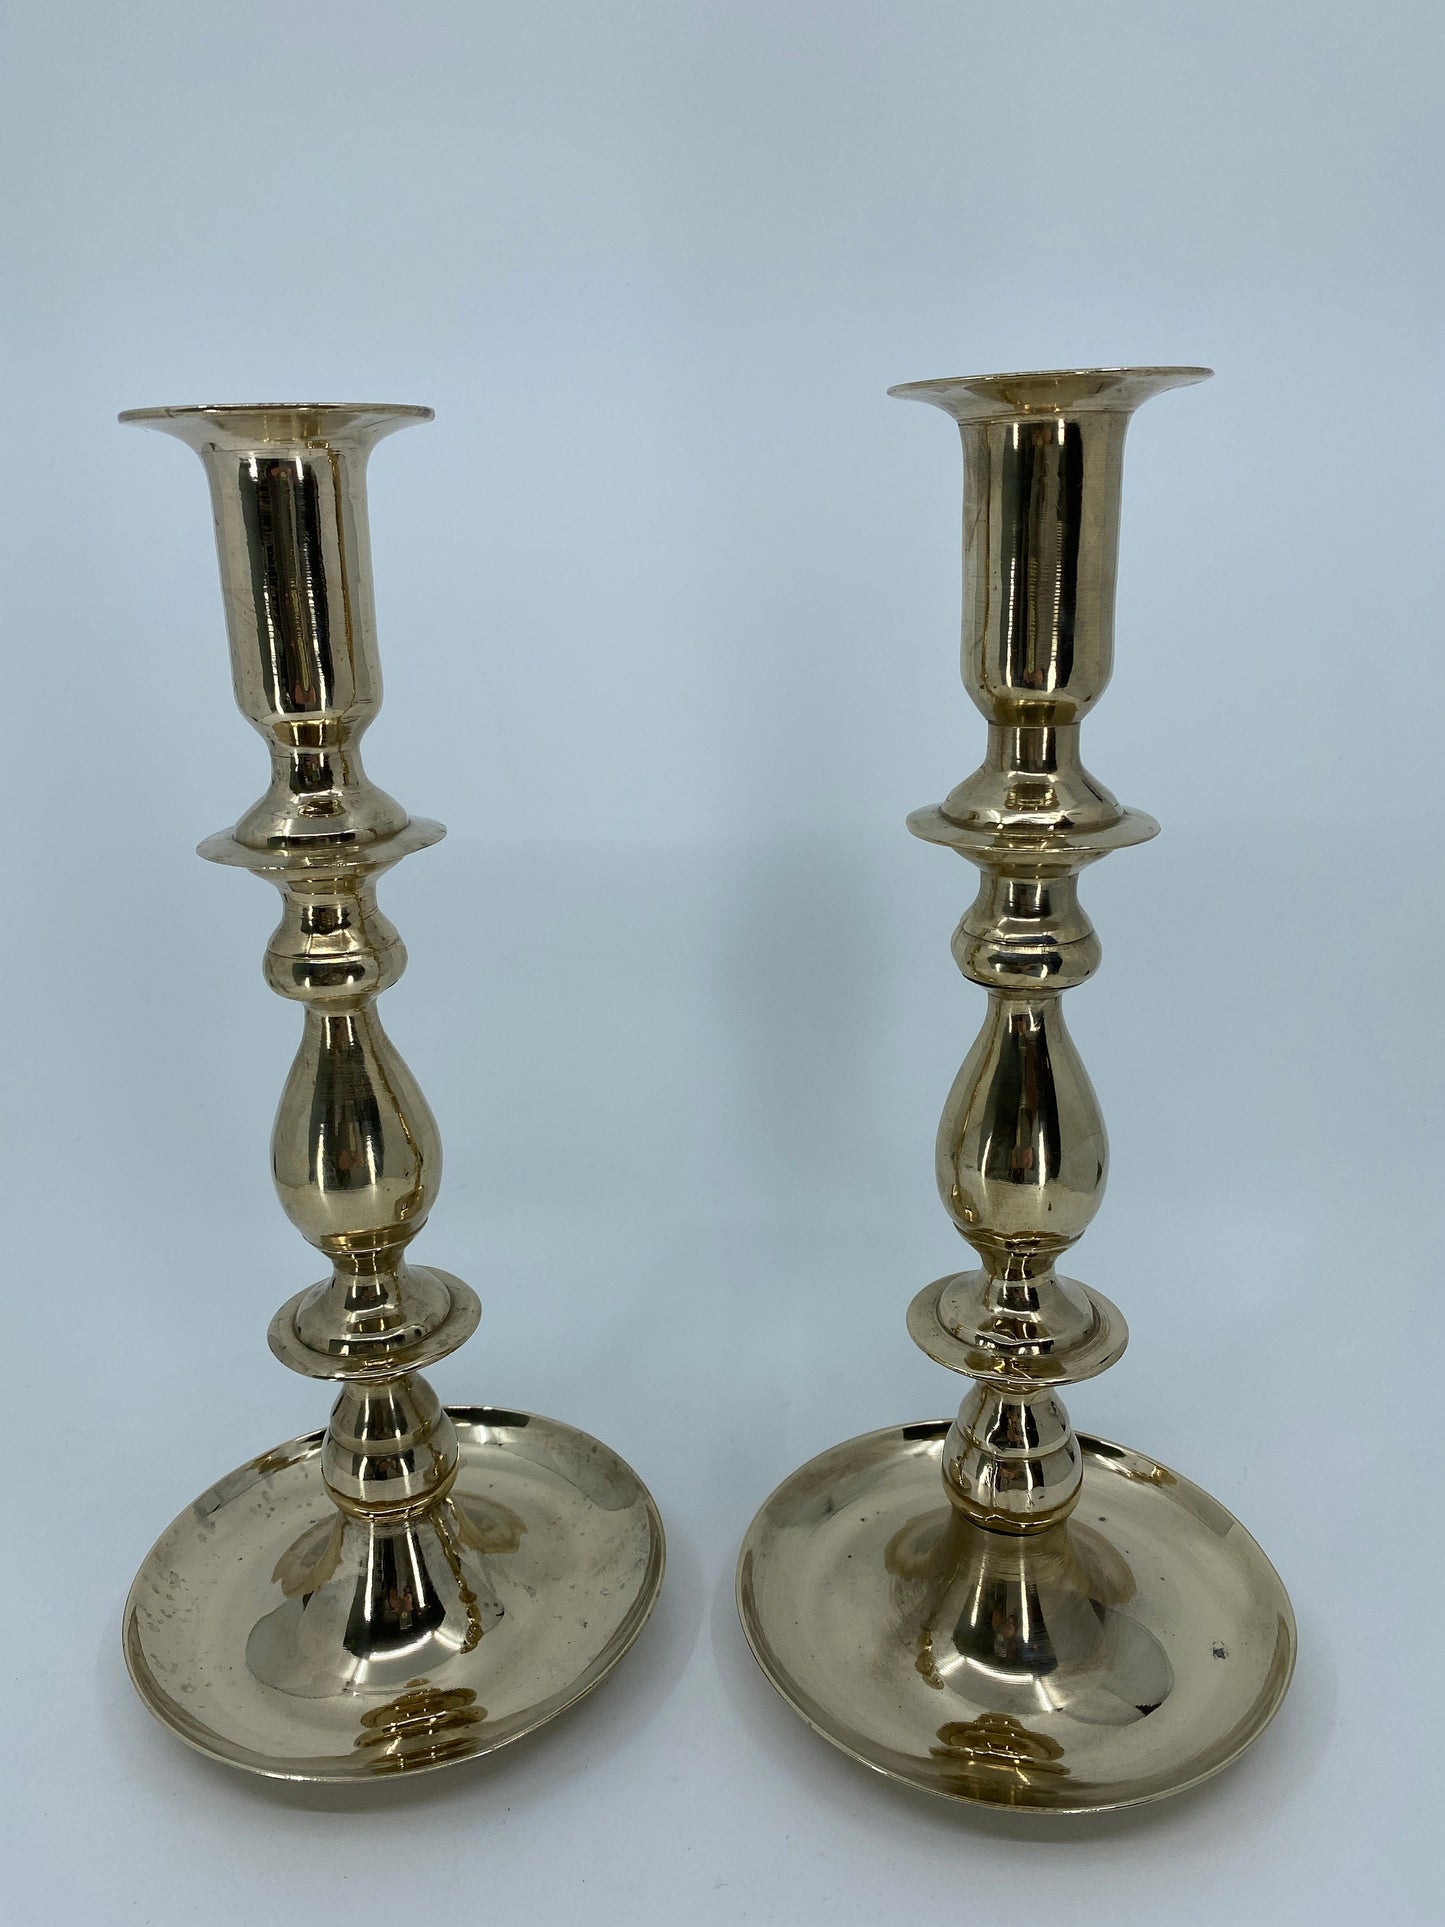 Vintage Brass Candlesticks, Pair of Tall Candle Holders